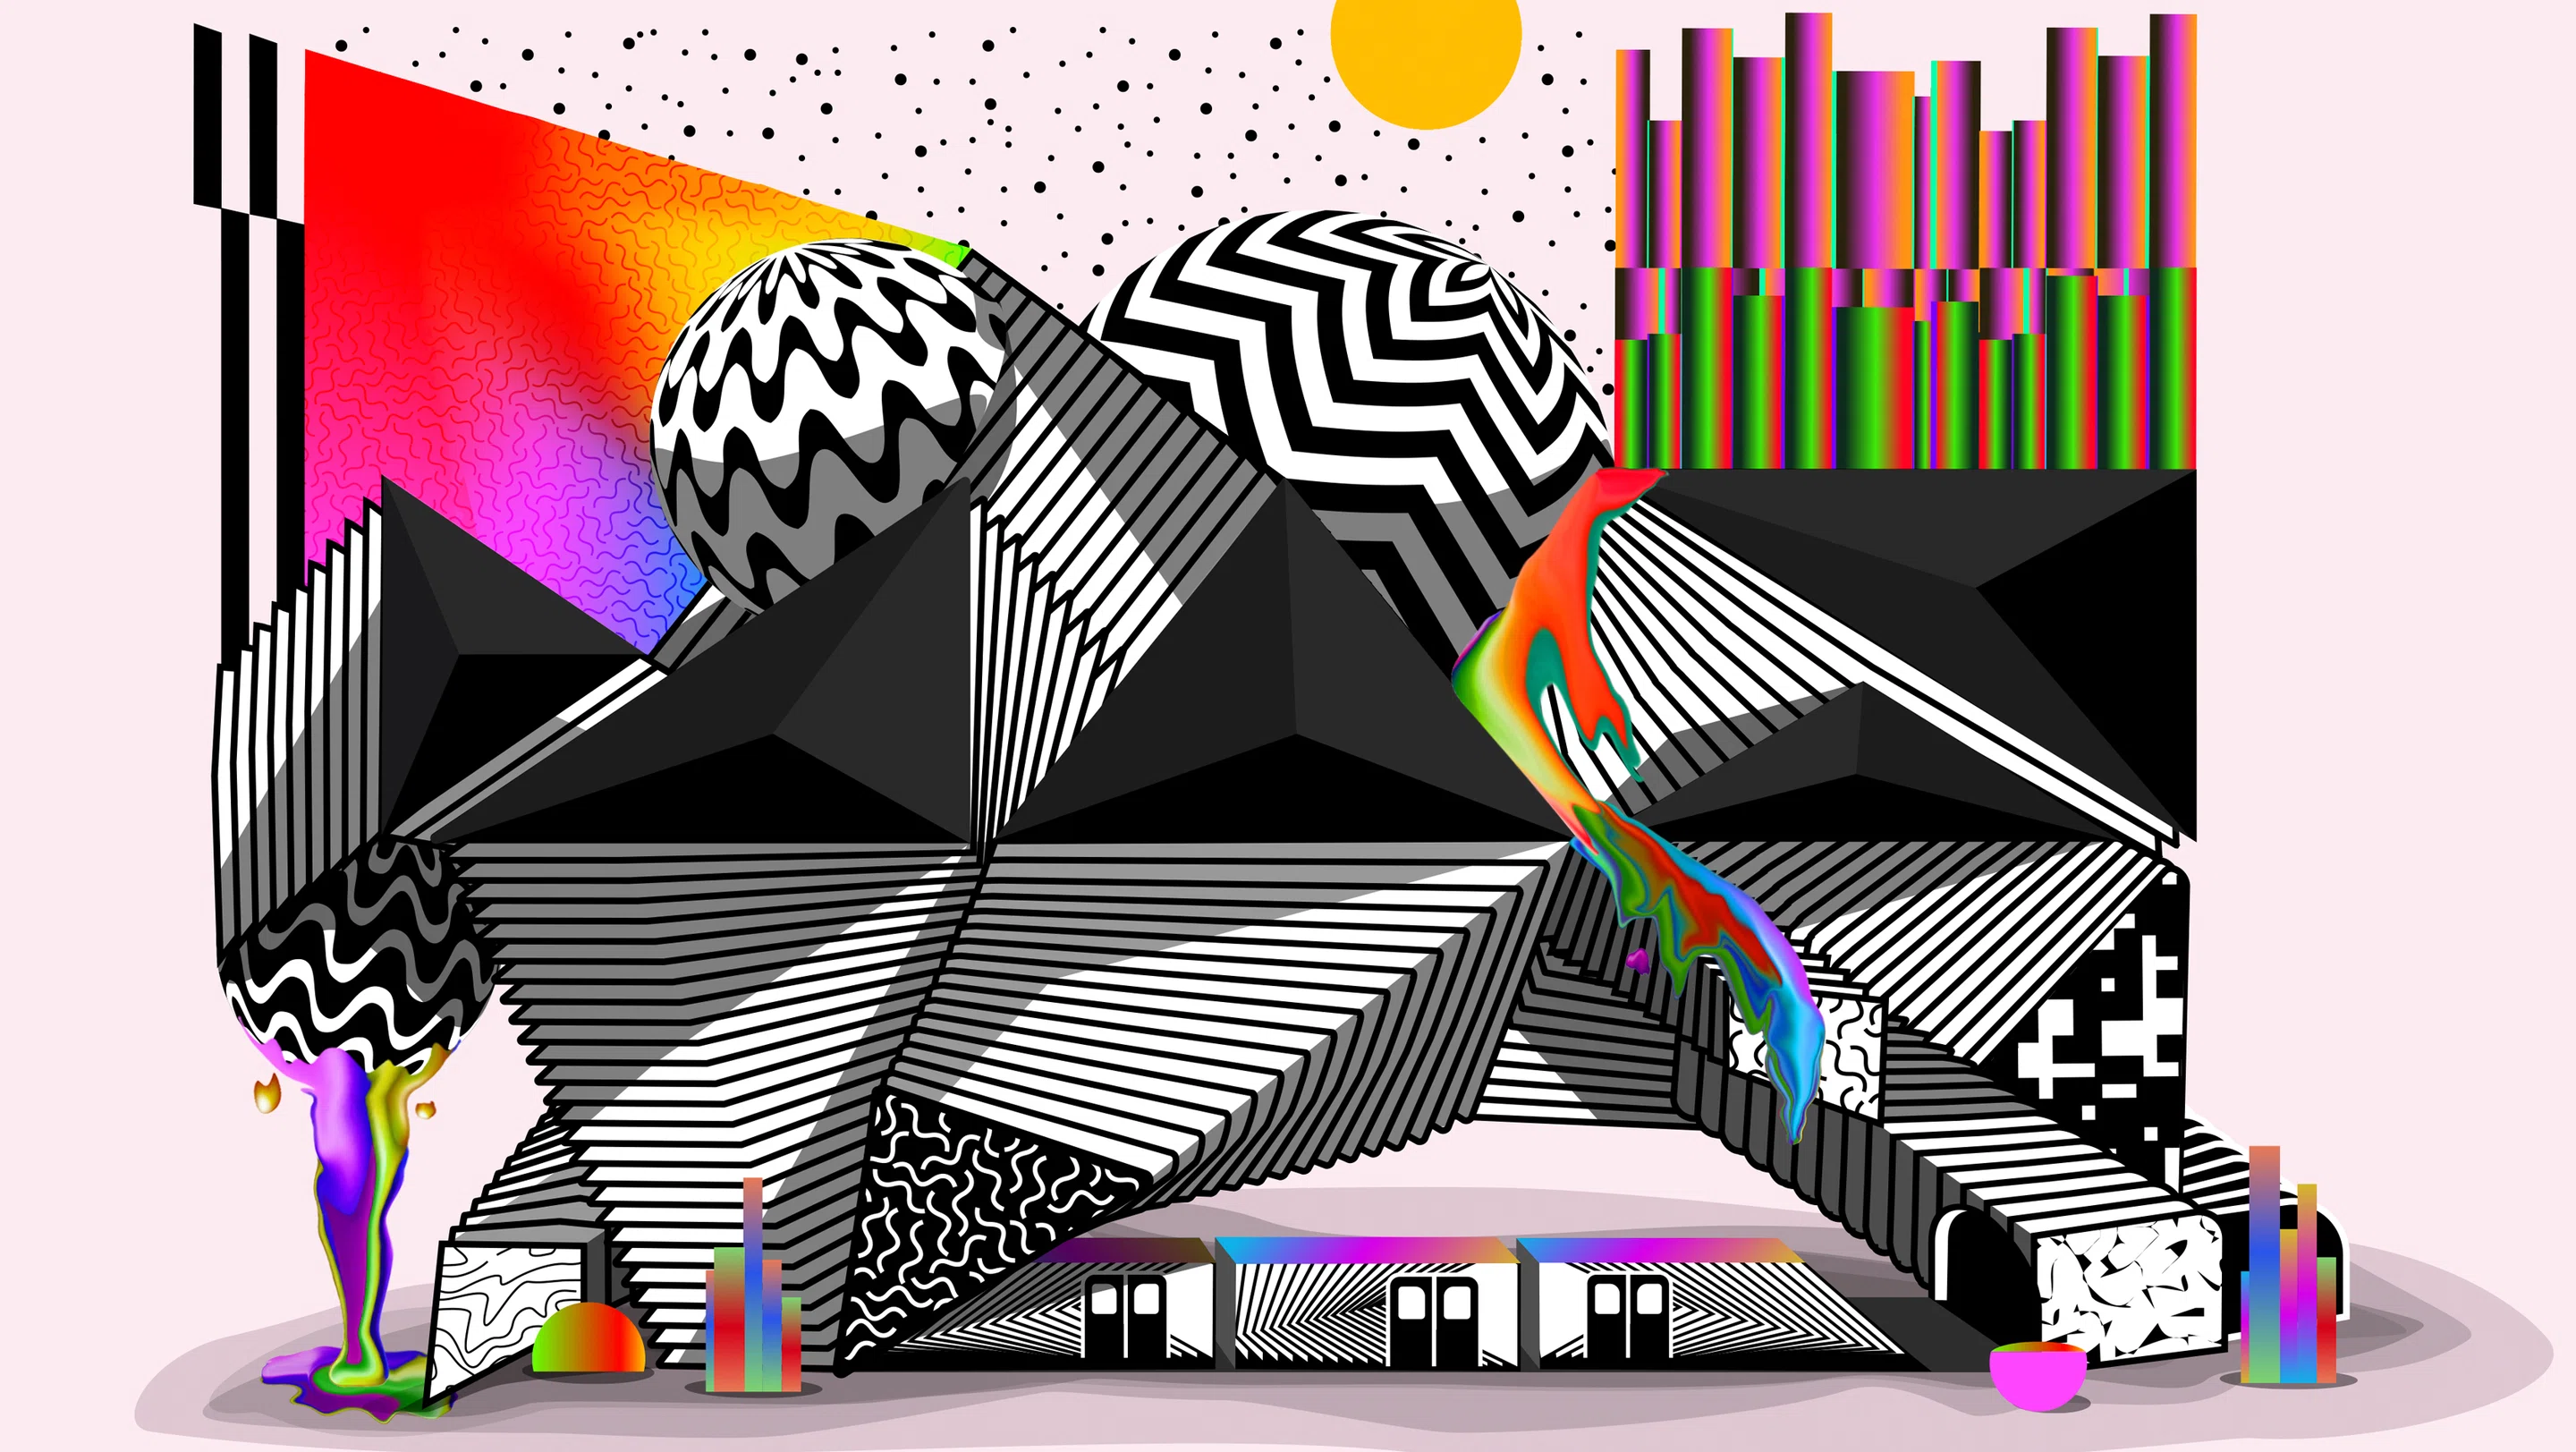 Here's what graphic design fans have to look forward to at this year's  Adobe MAX